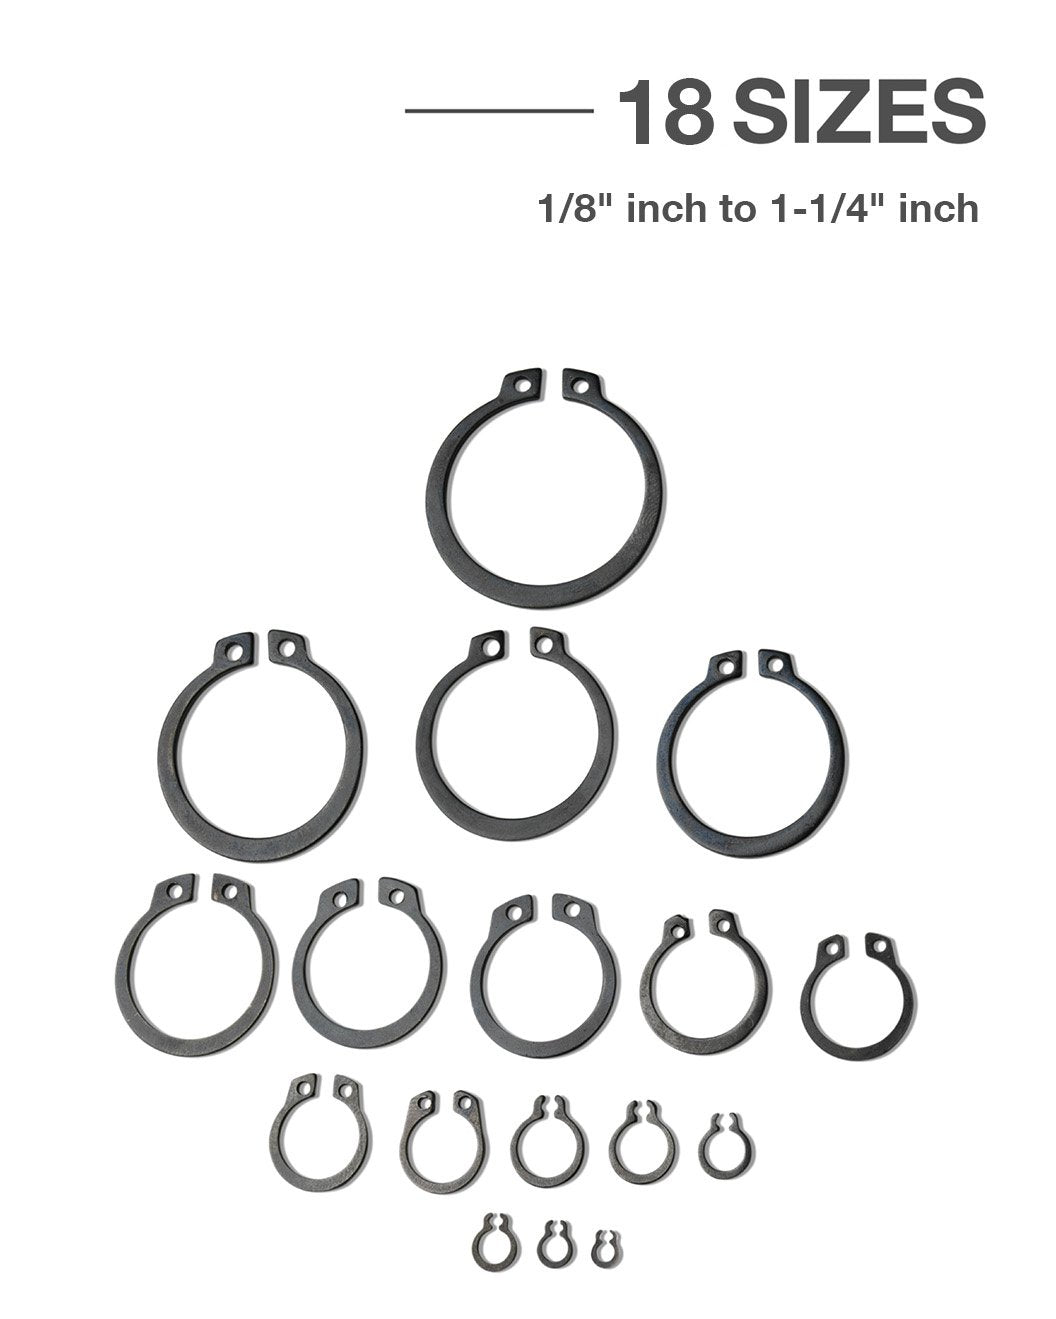 Snap Ring Shop Assortment, 300 Count | 18 Sizes (1/8" - 1-1/4") | Hardened Steel